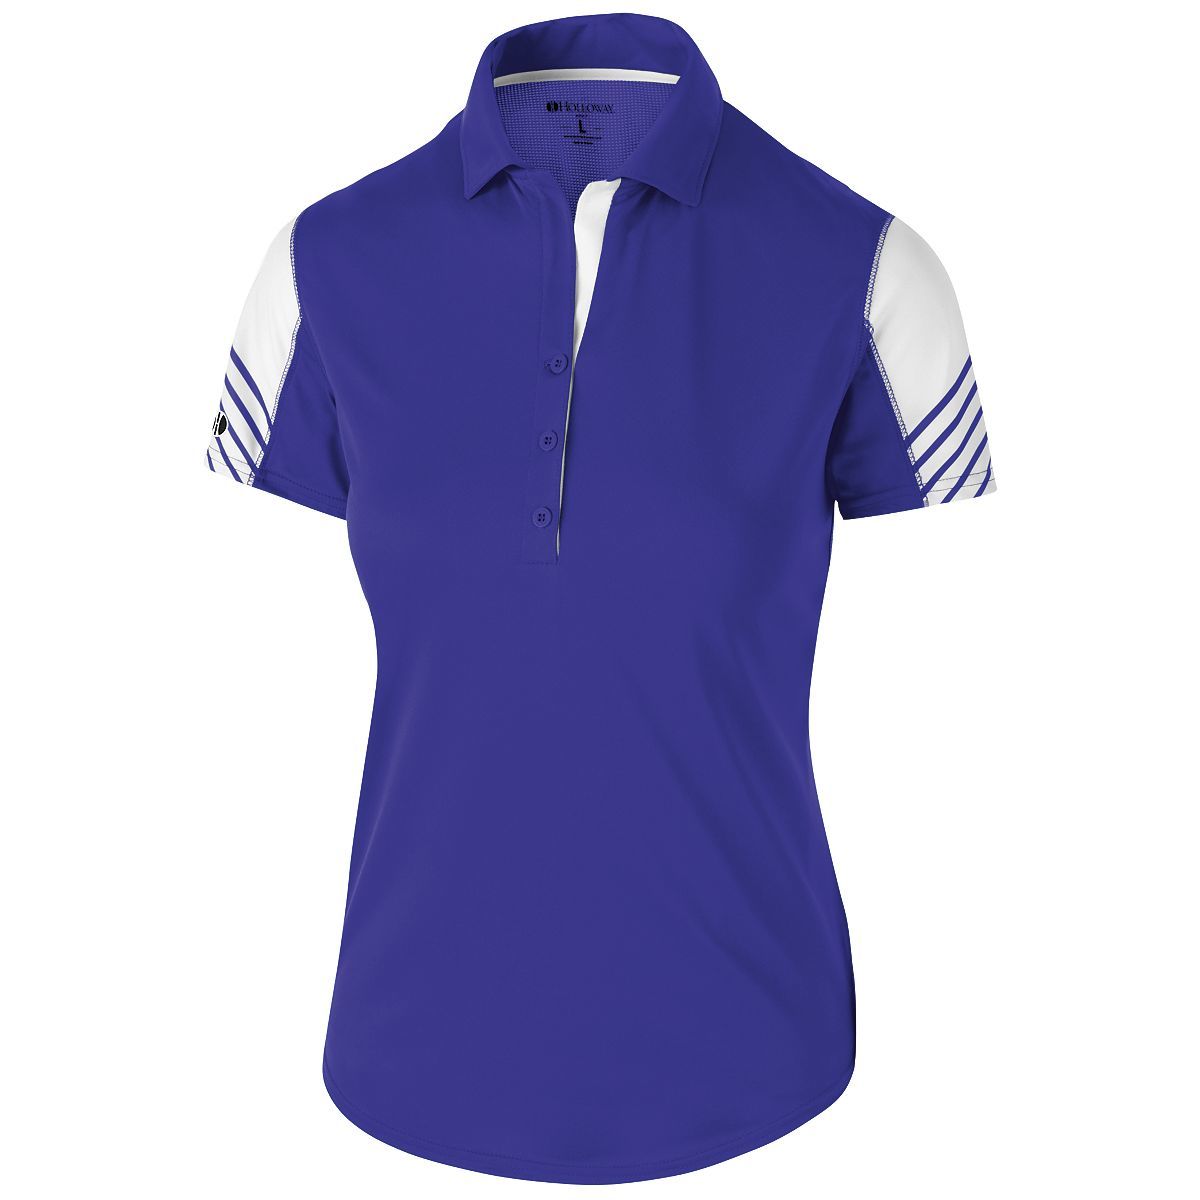 Holloway Ladies Arc Polo in Purple/White  -Part of the Ladies, Ladies-Polo, Polos, Holloway, Shirts product lines at KanaleyCreations.com